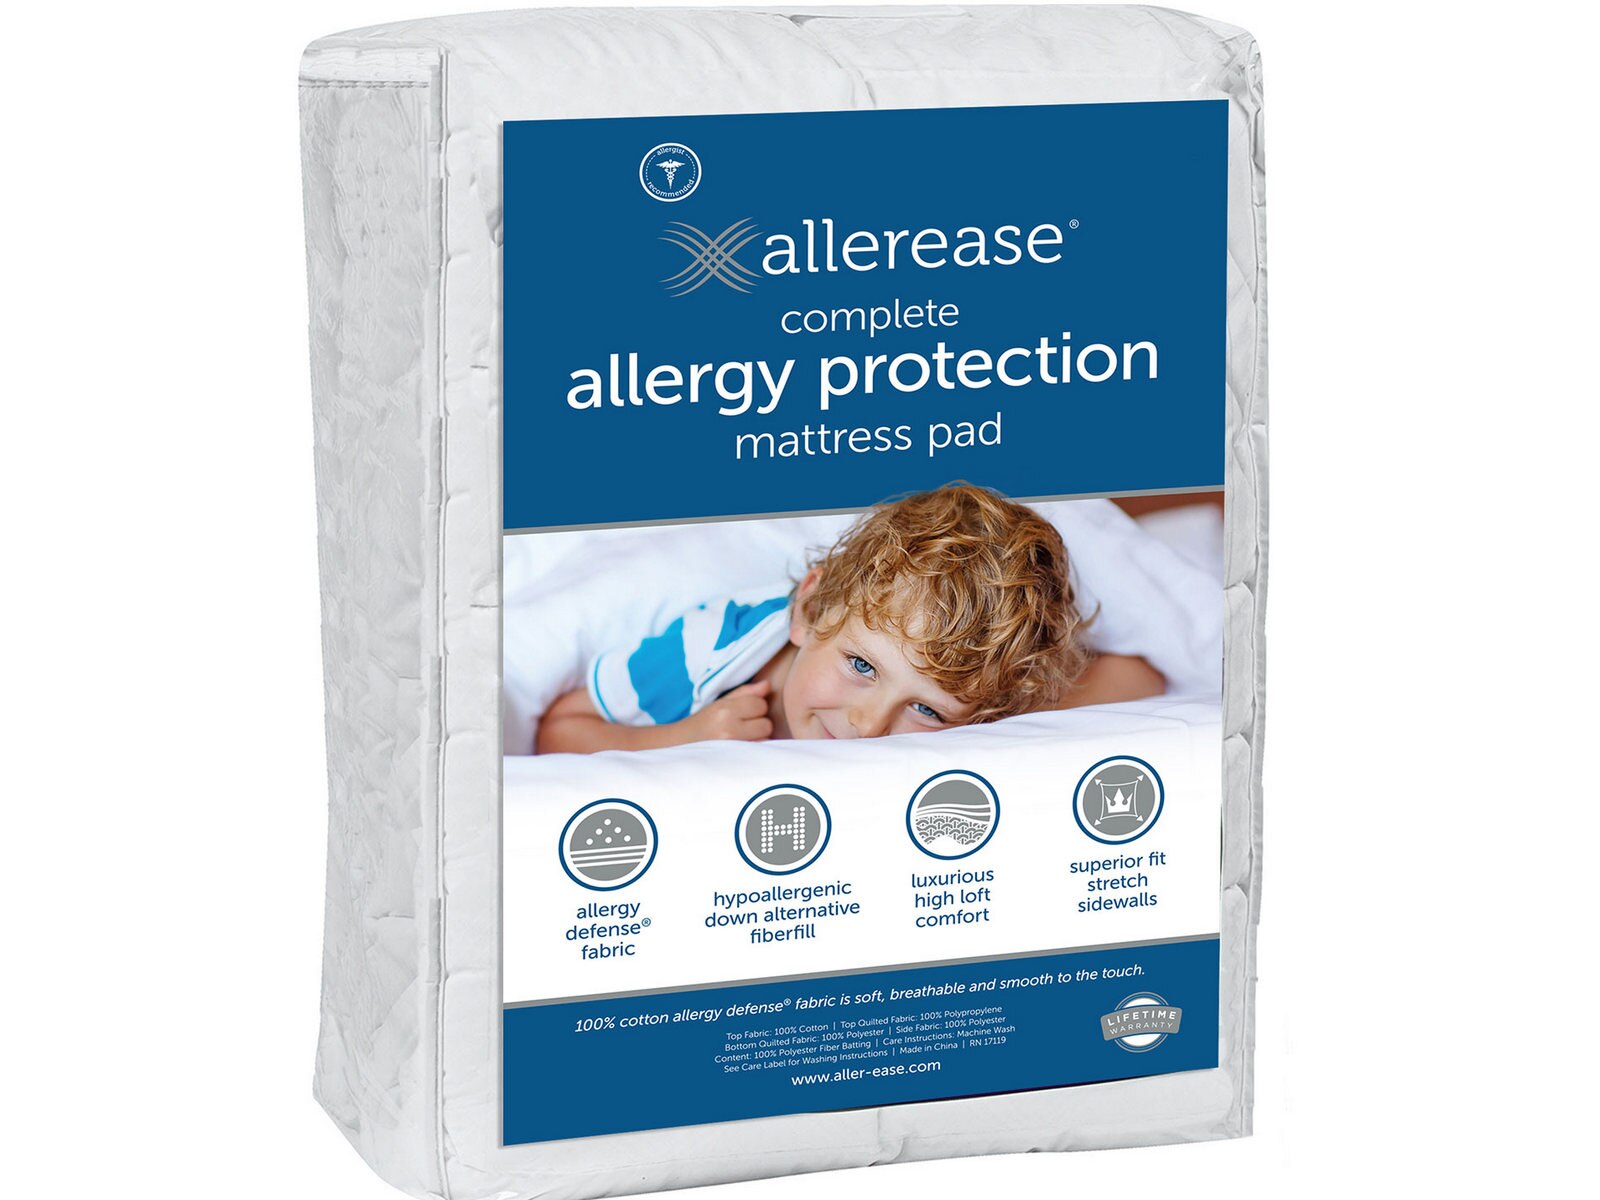 allerease hot water washable allergy protection mattress pad